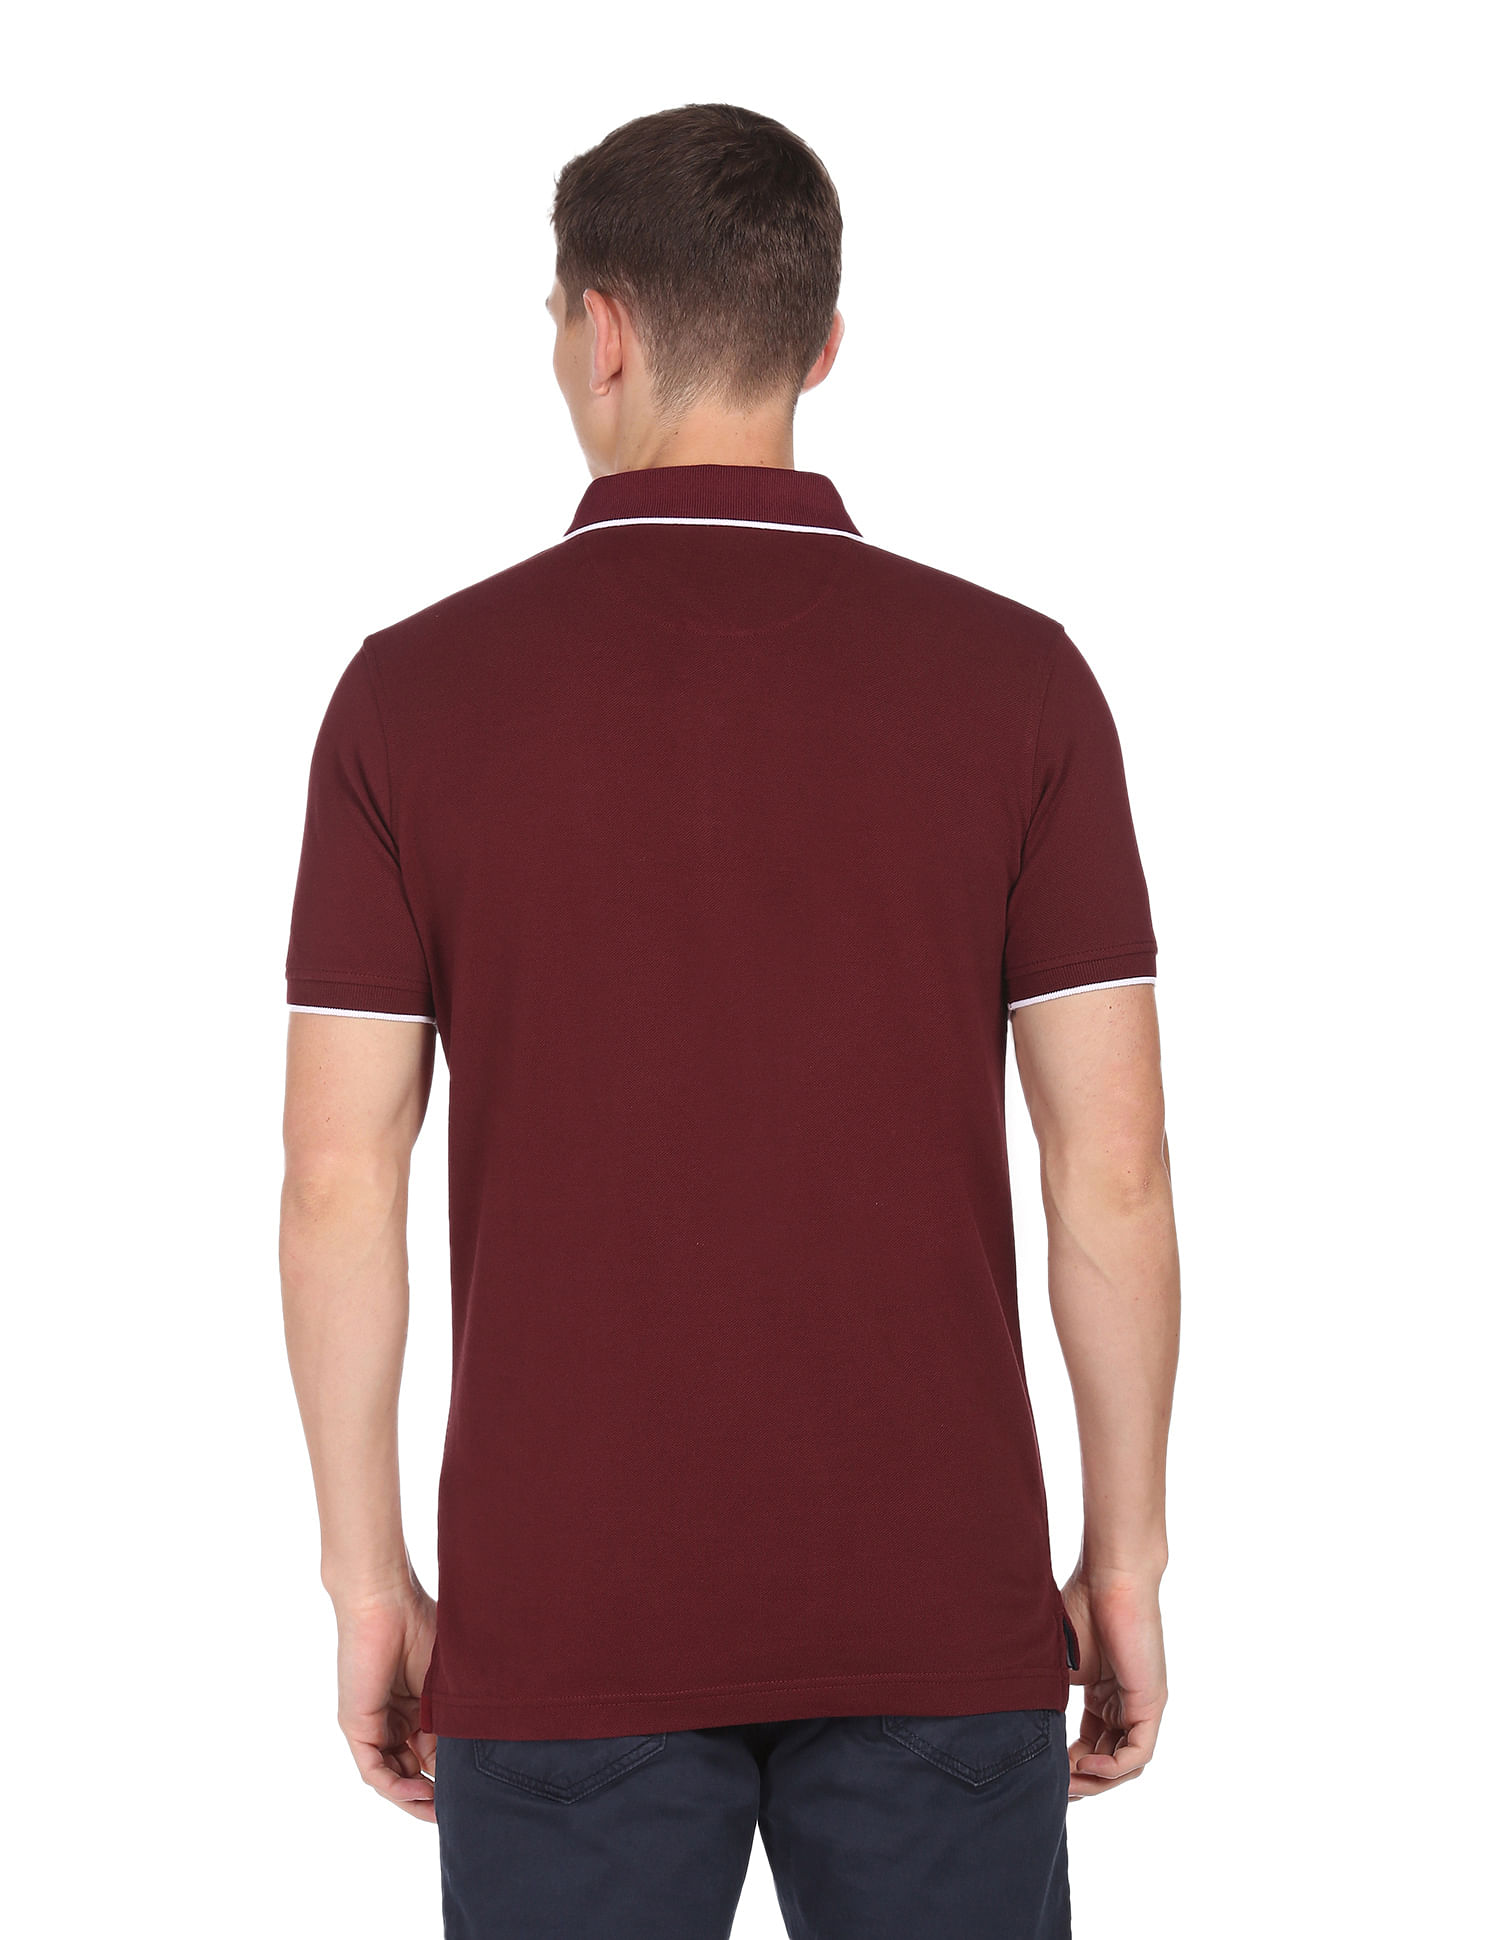 COUNTRY JERSEY MARL POLO SHIRT - BURGUNDY